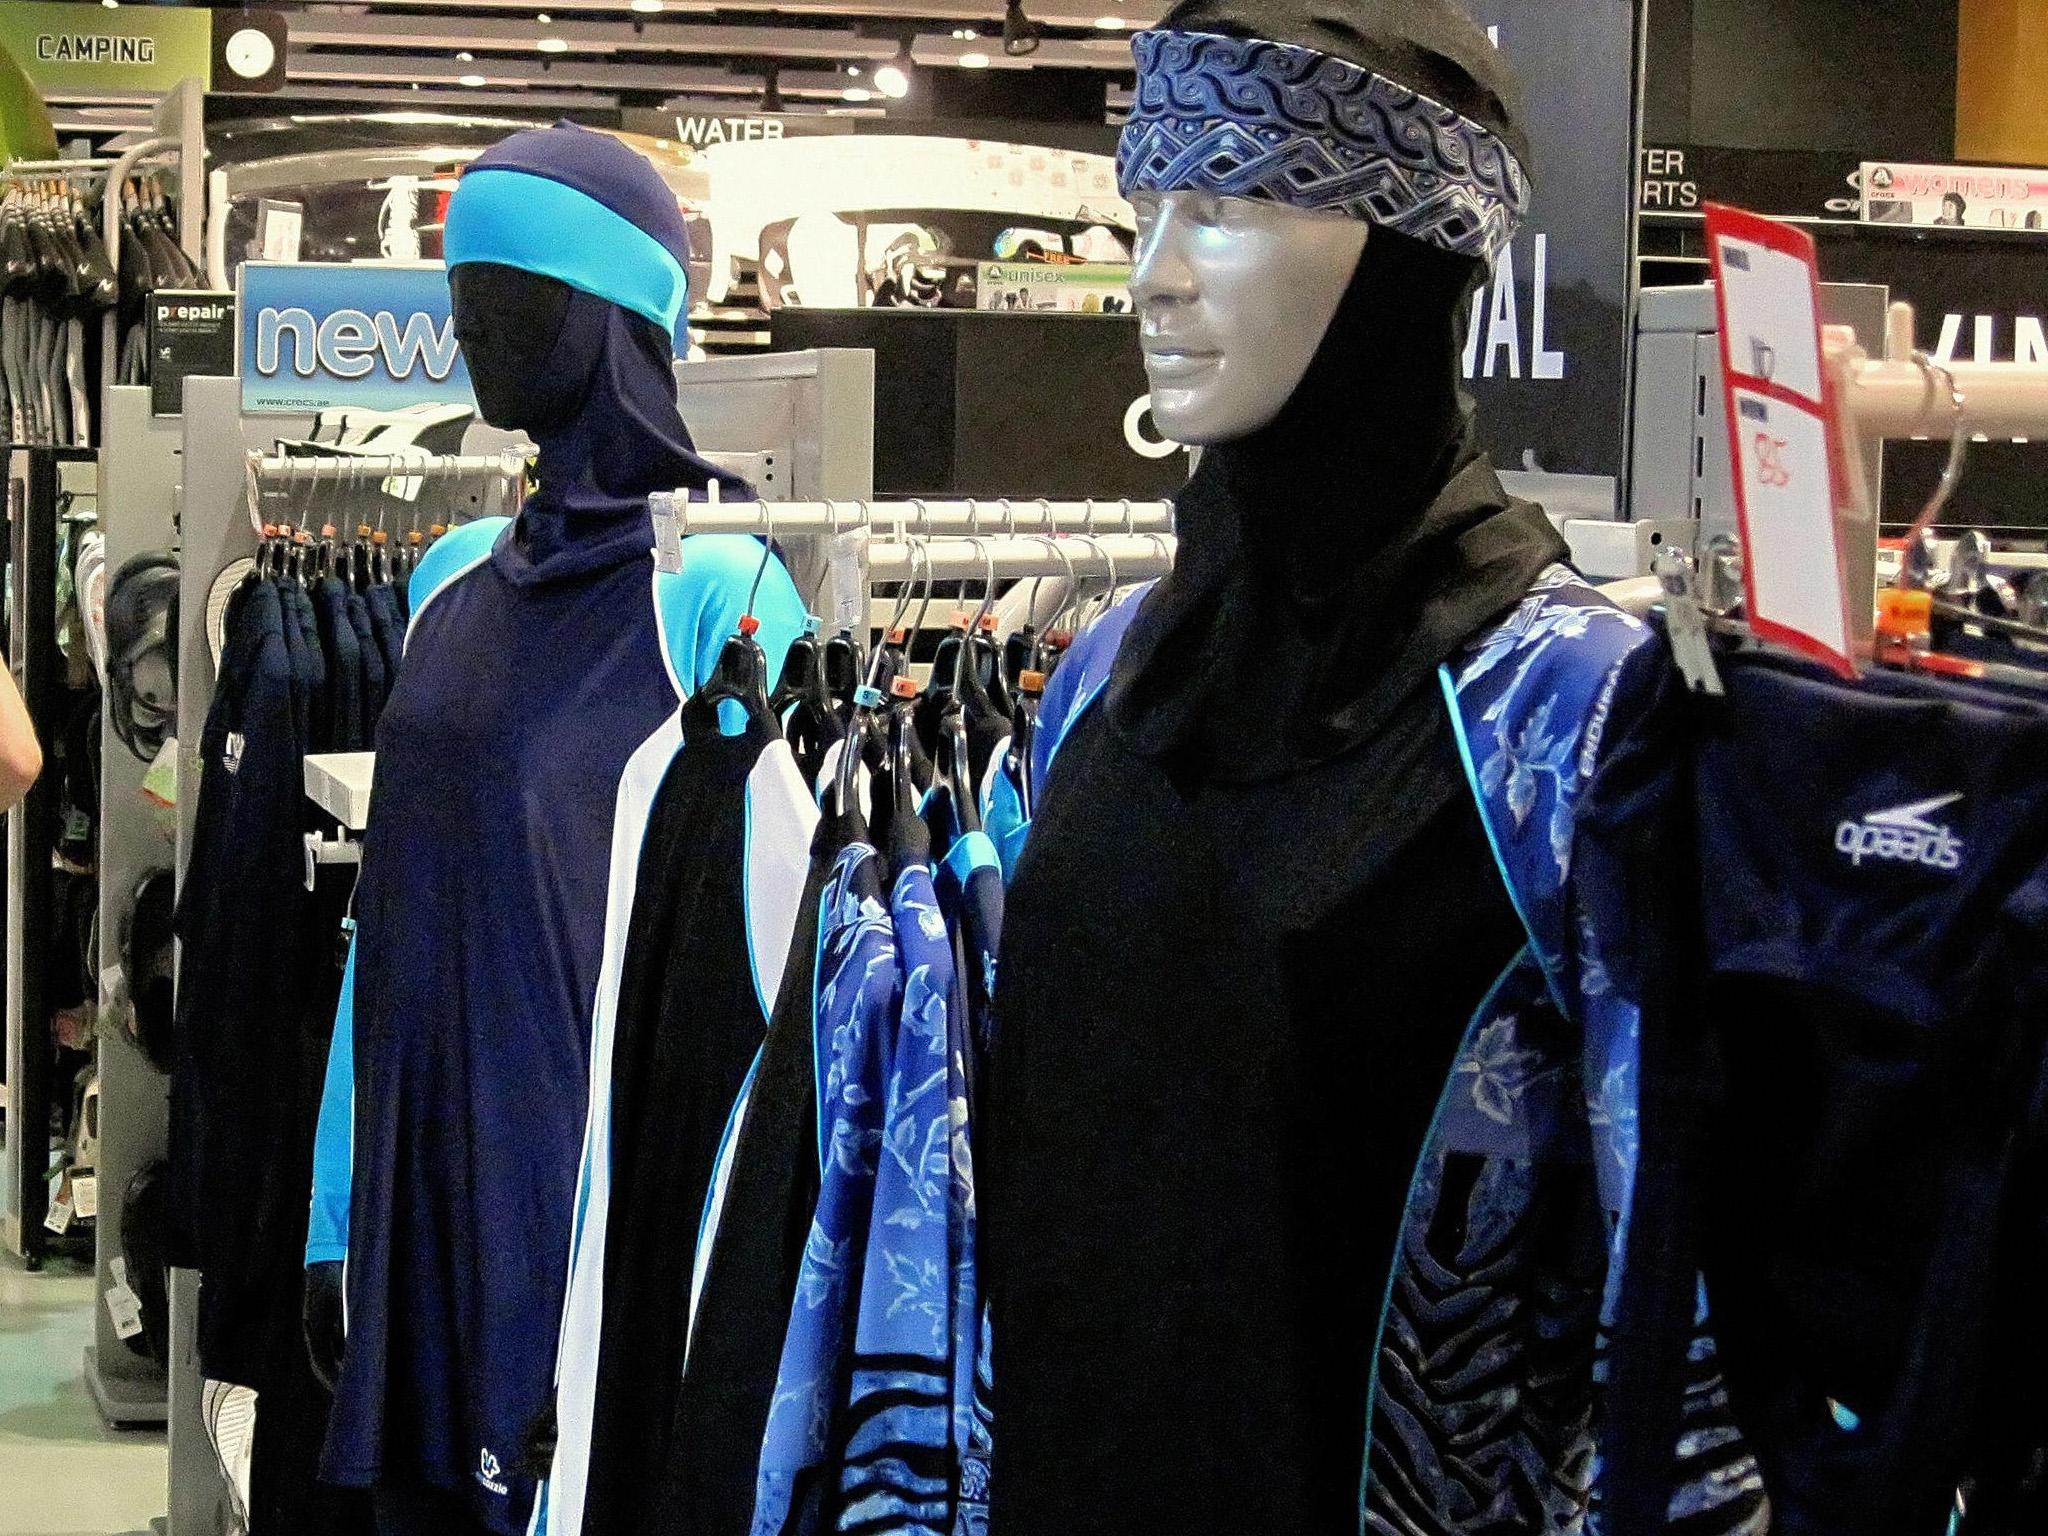 Burkinis have sparked a heated debate about human rights in France